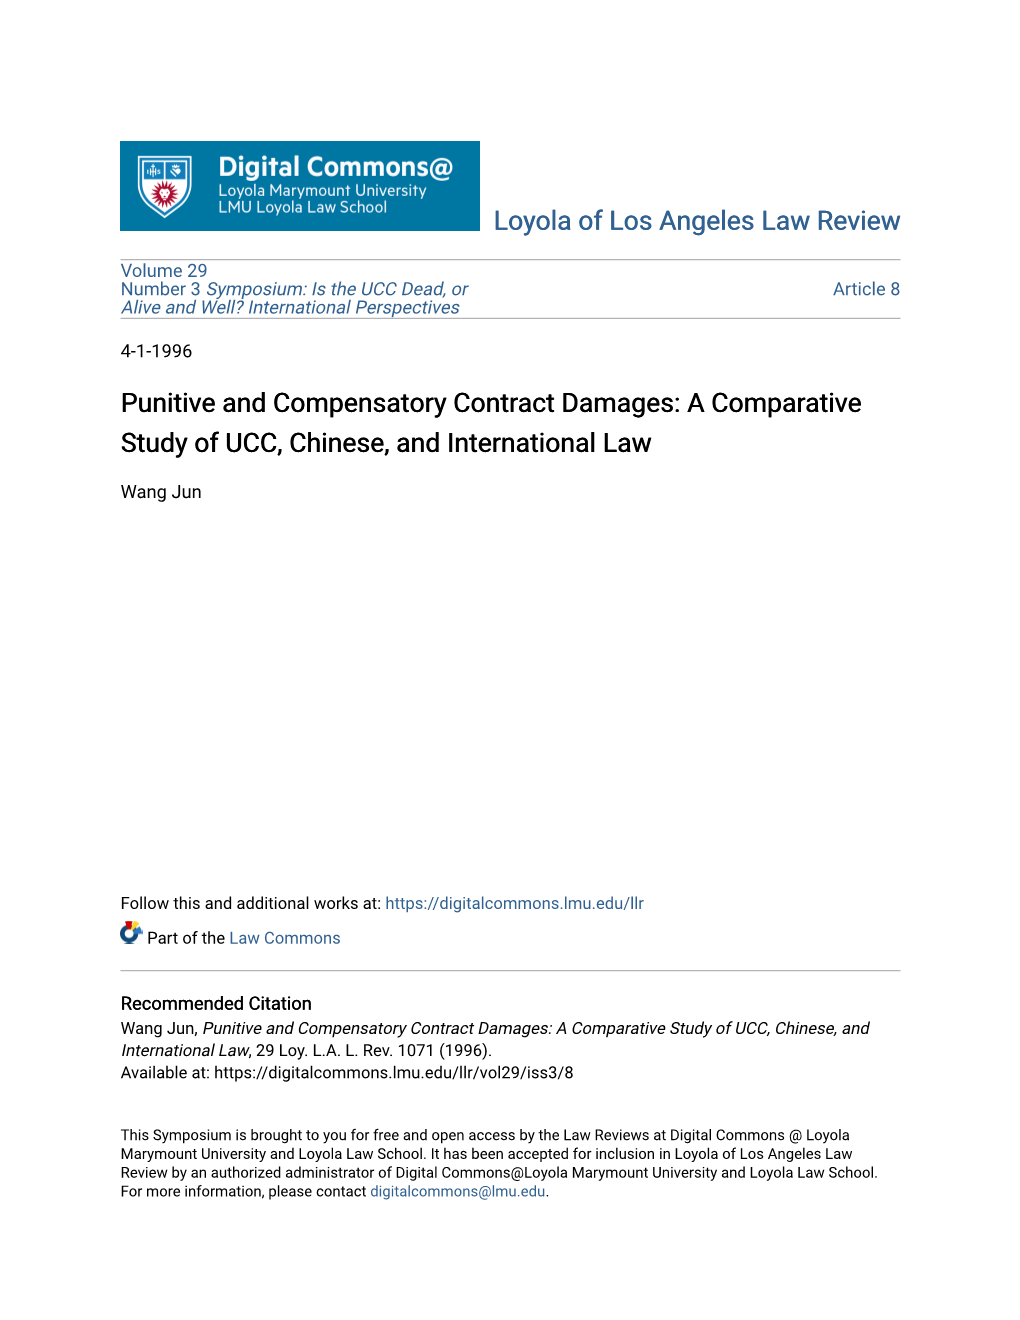 Punitive and Compensatory Contract Damages: a Comparative Study of UCC, Chinese, and International Law